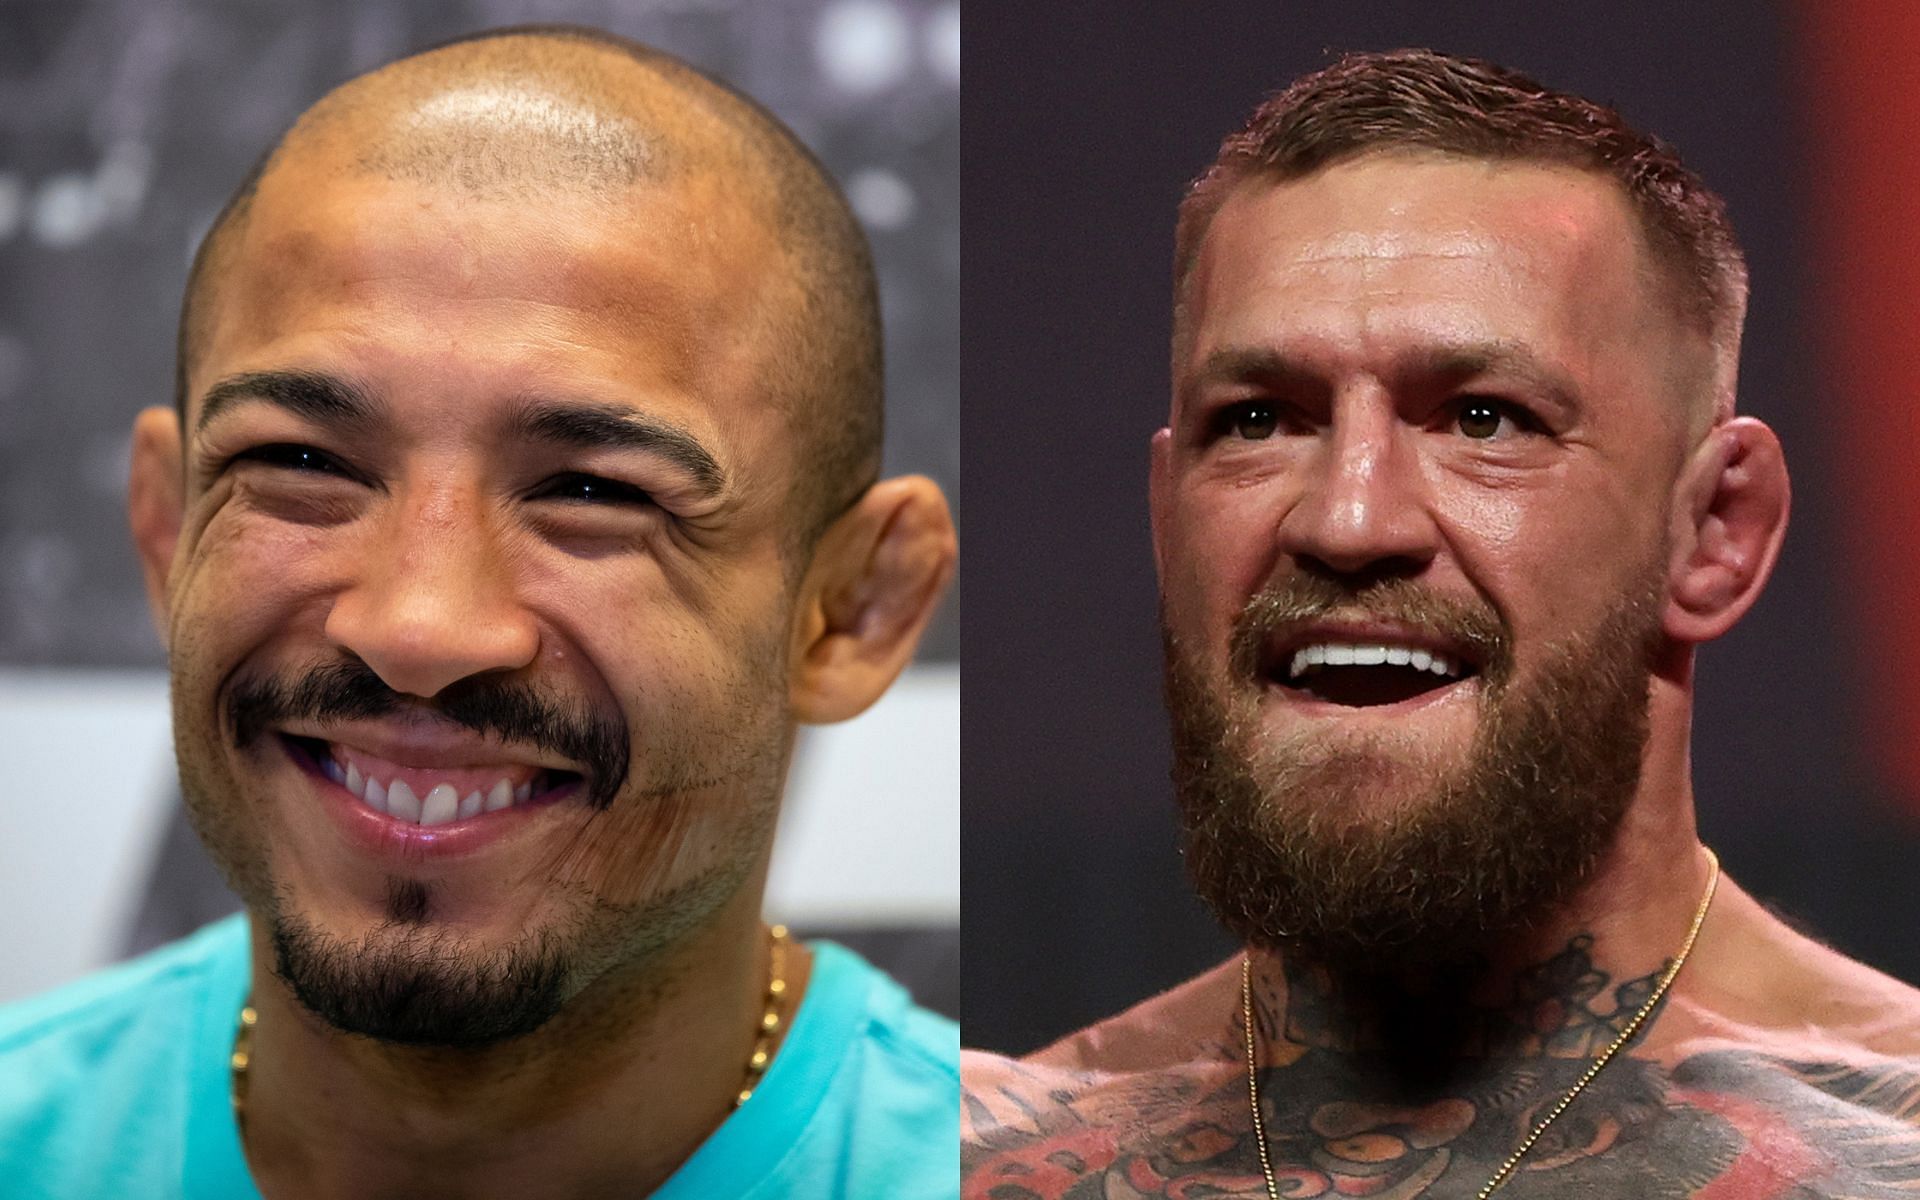 Jose Aldo (left) and Conor McGregor (right) (Image credits Getty Images)